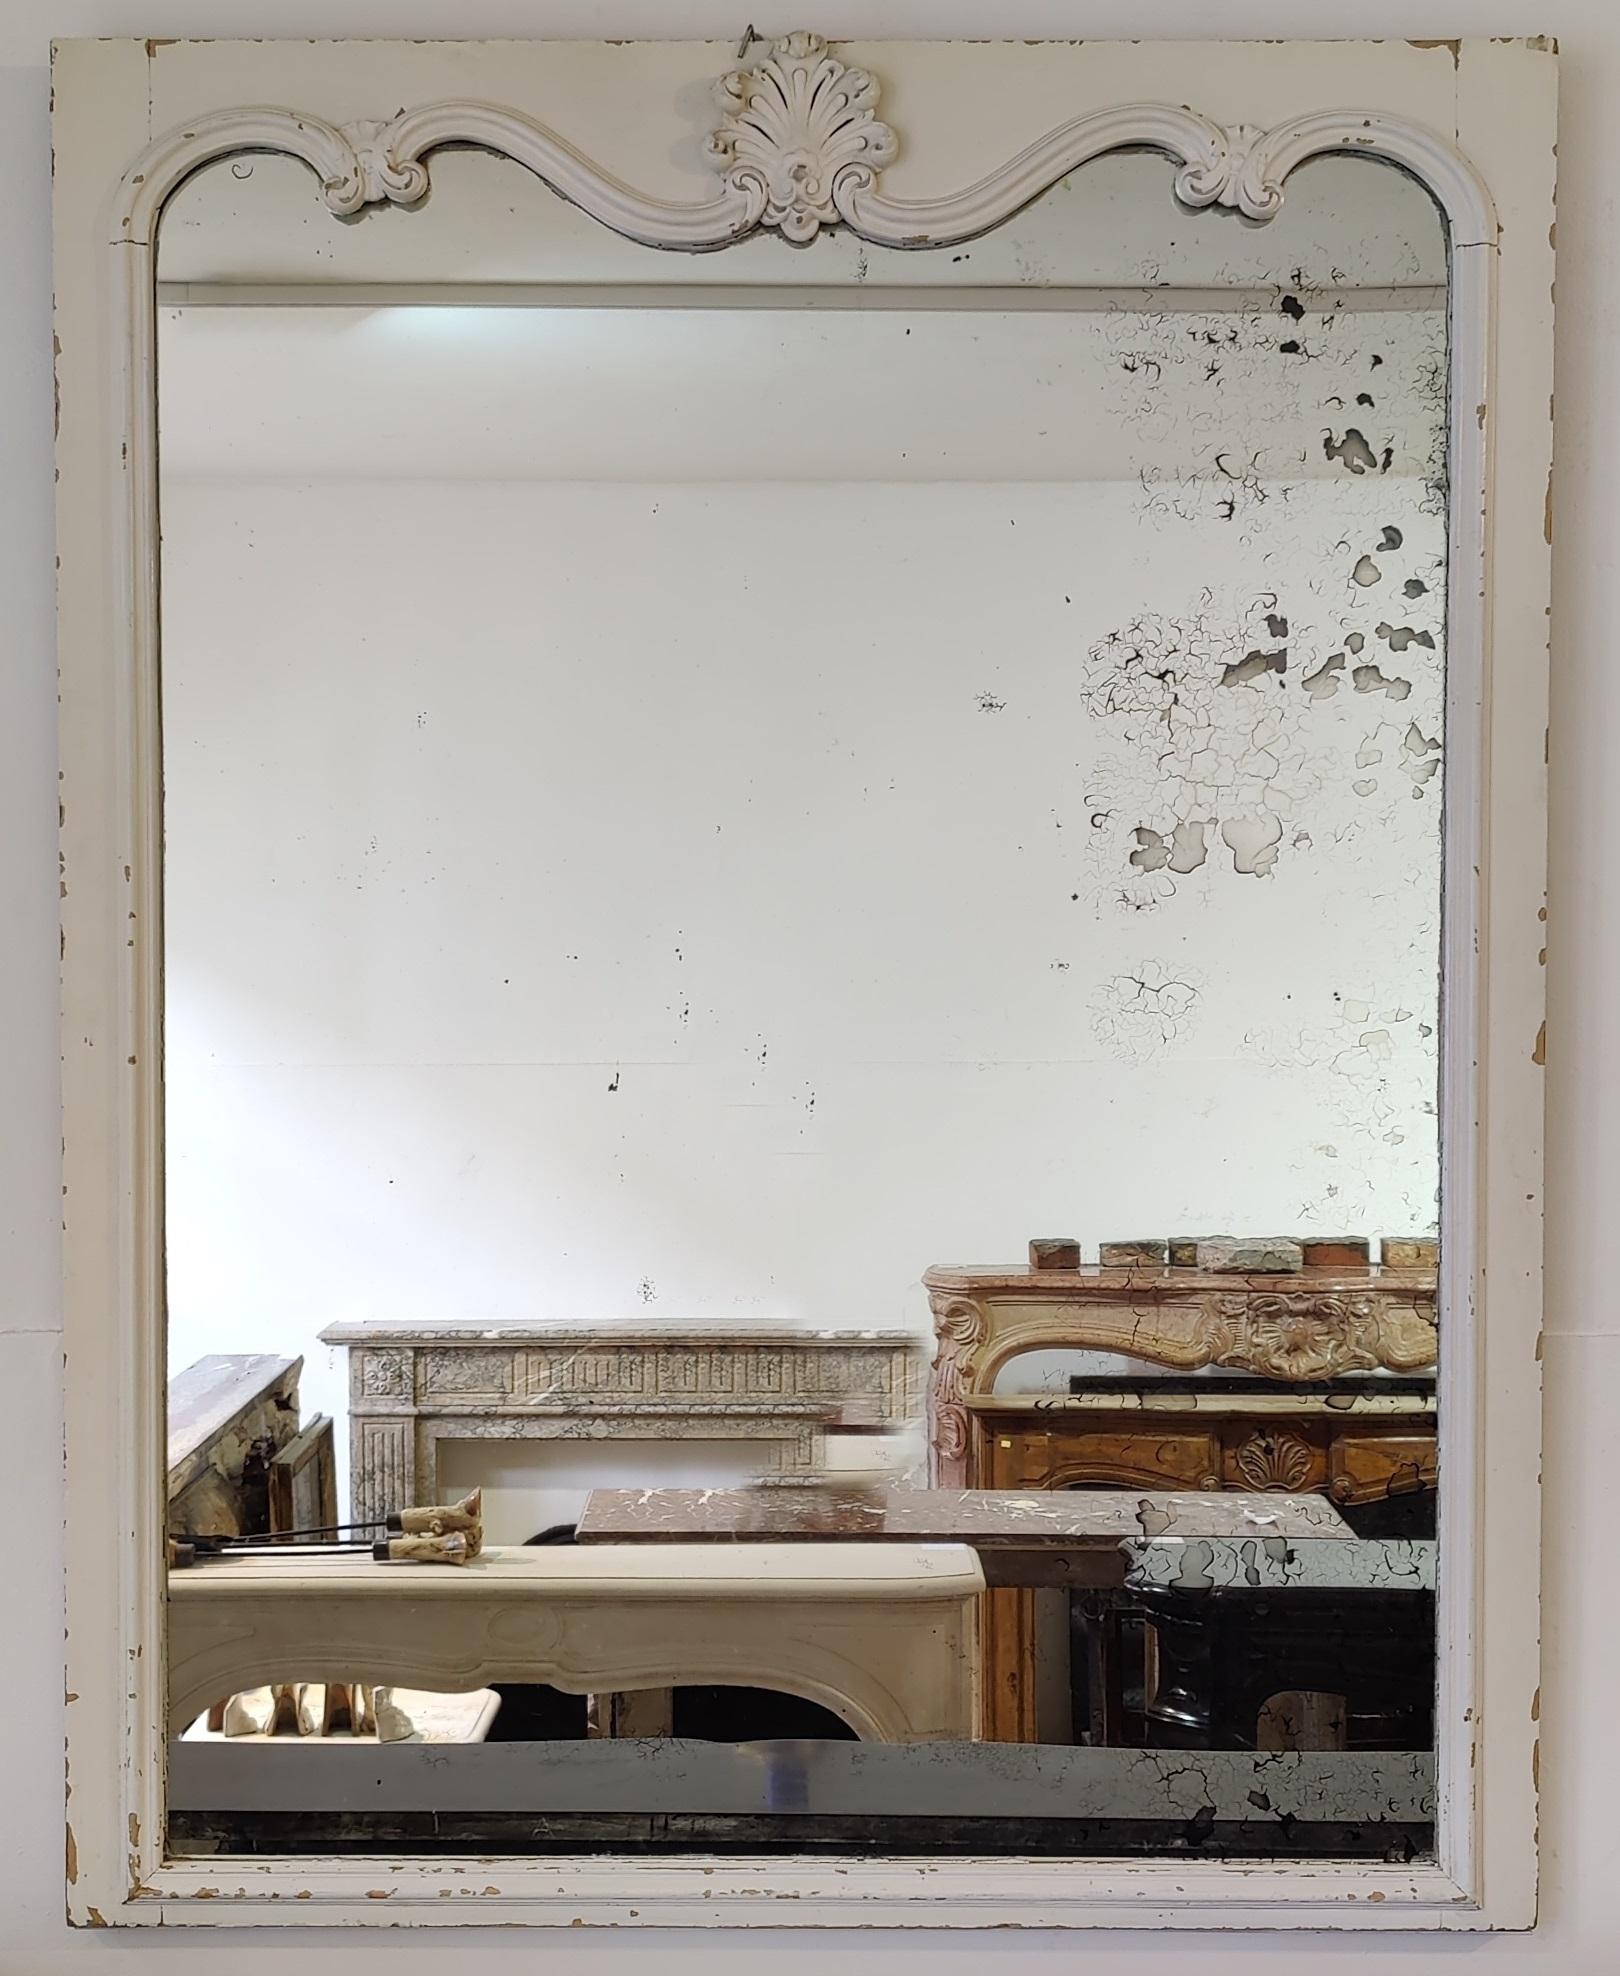 Fantastic French symmetric overmantel / trumeau mirror.
The painted frame shows great decorations and patina.

Mirror has some nice oxidation and wear, consistent with its age.

Mirror size: 
Inch: 68,11 x 53,5 x 1,7 (Height x Width x